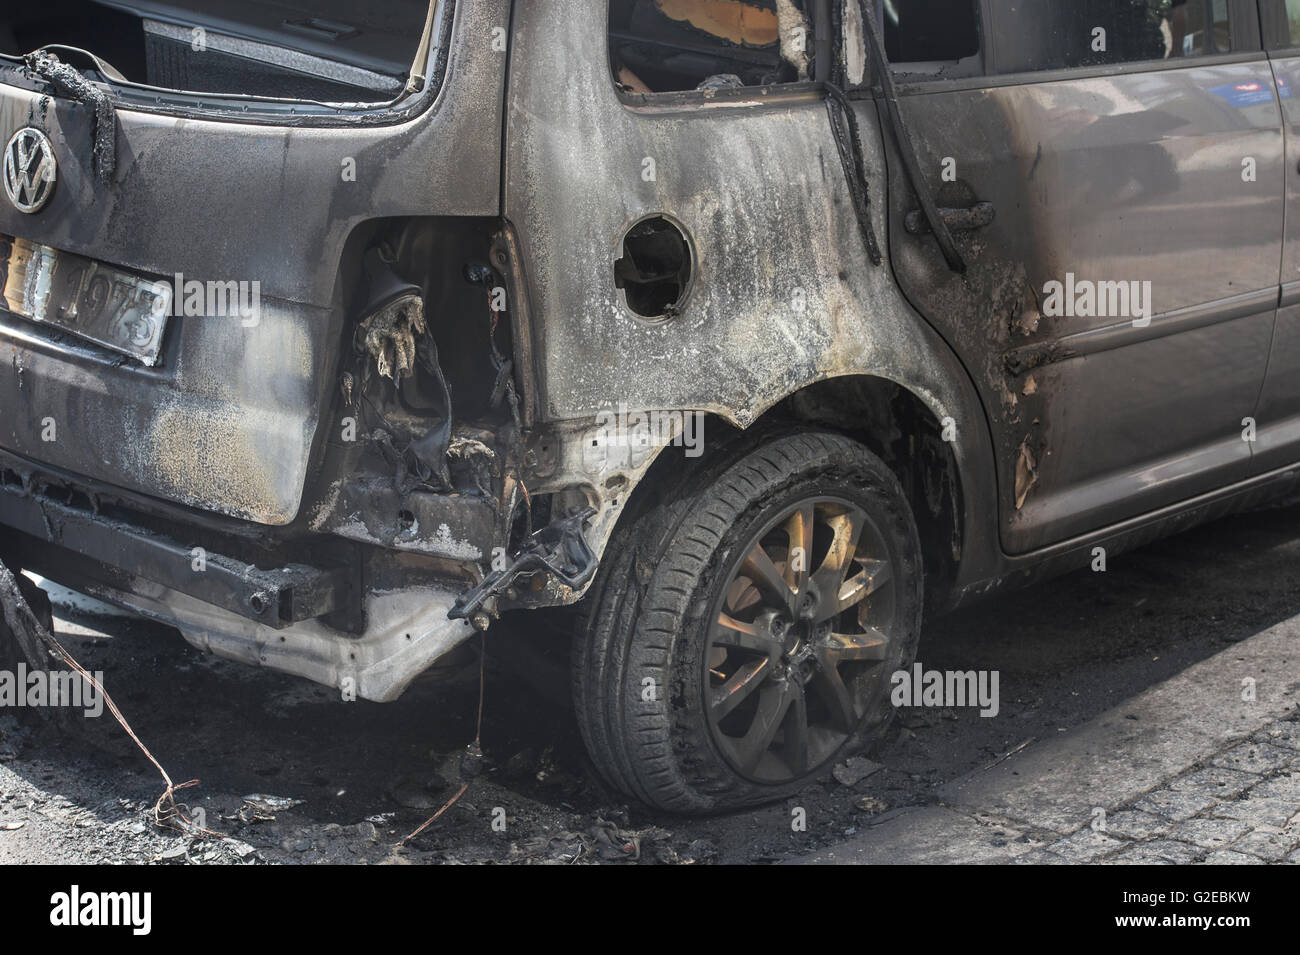 Berlin, Germany. 29th May, 2016. A car destroyed by an arson attack at Alte Jakobstrasse in Berlin, Germany, 29 May 2016. According to the police, unknown offenders lit cars on fire, destroyed windows and threw incendiary compositions on the new building. PHOTO: PAUL ZINKEN/dpa/Alamy Live News Stock Photo